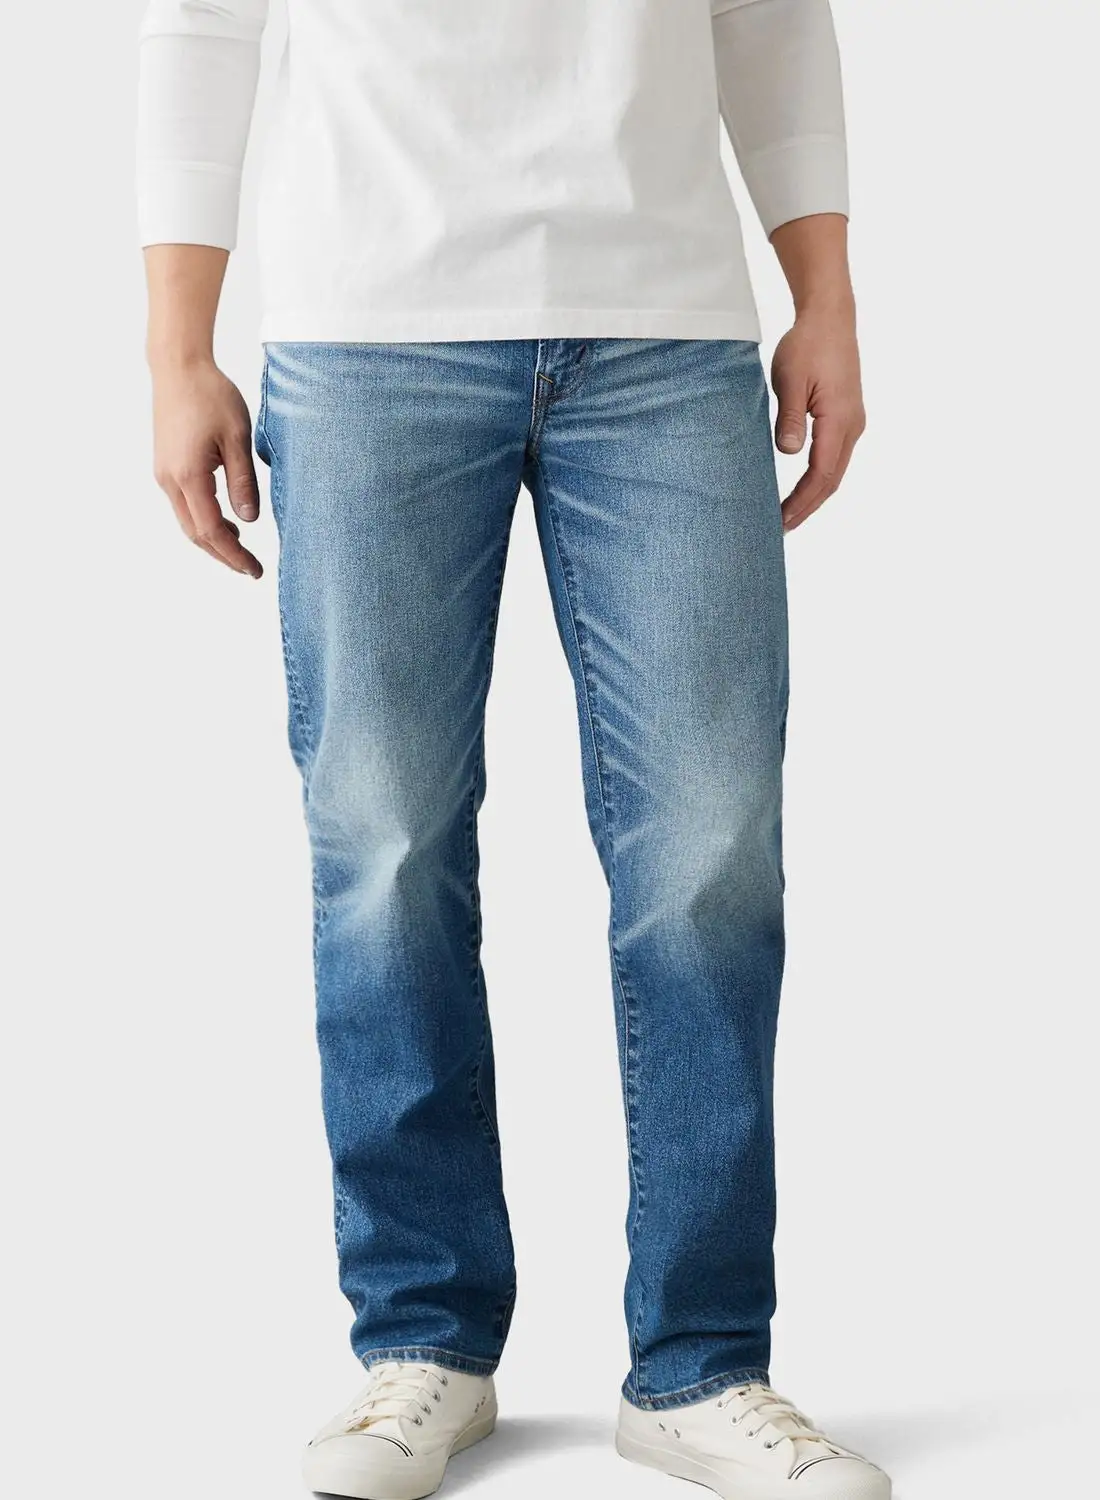 American Eagle Airflex+Light Wash Straight Fit Jeans